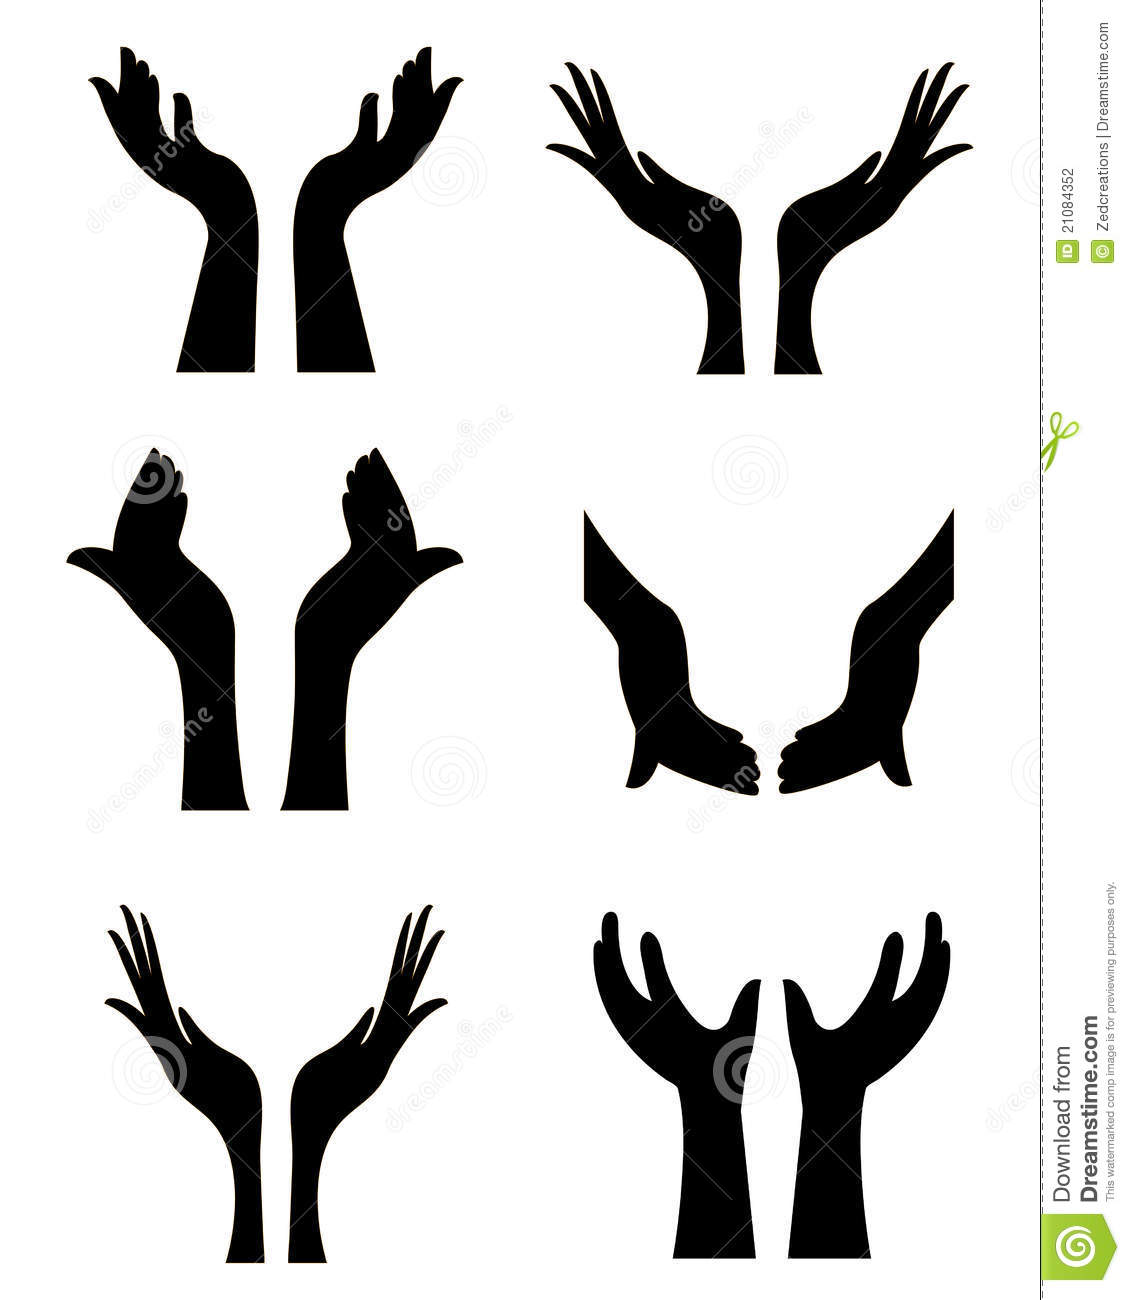 Open Hands Clipart Black And White   Clipart Panda   Free Clipart